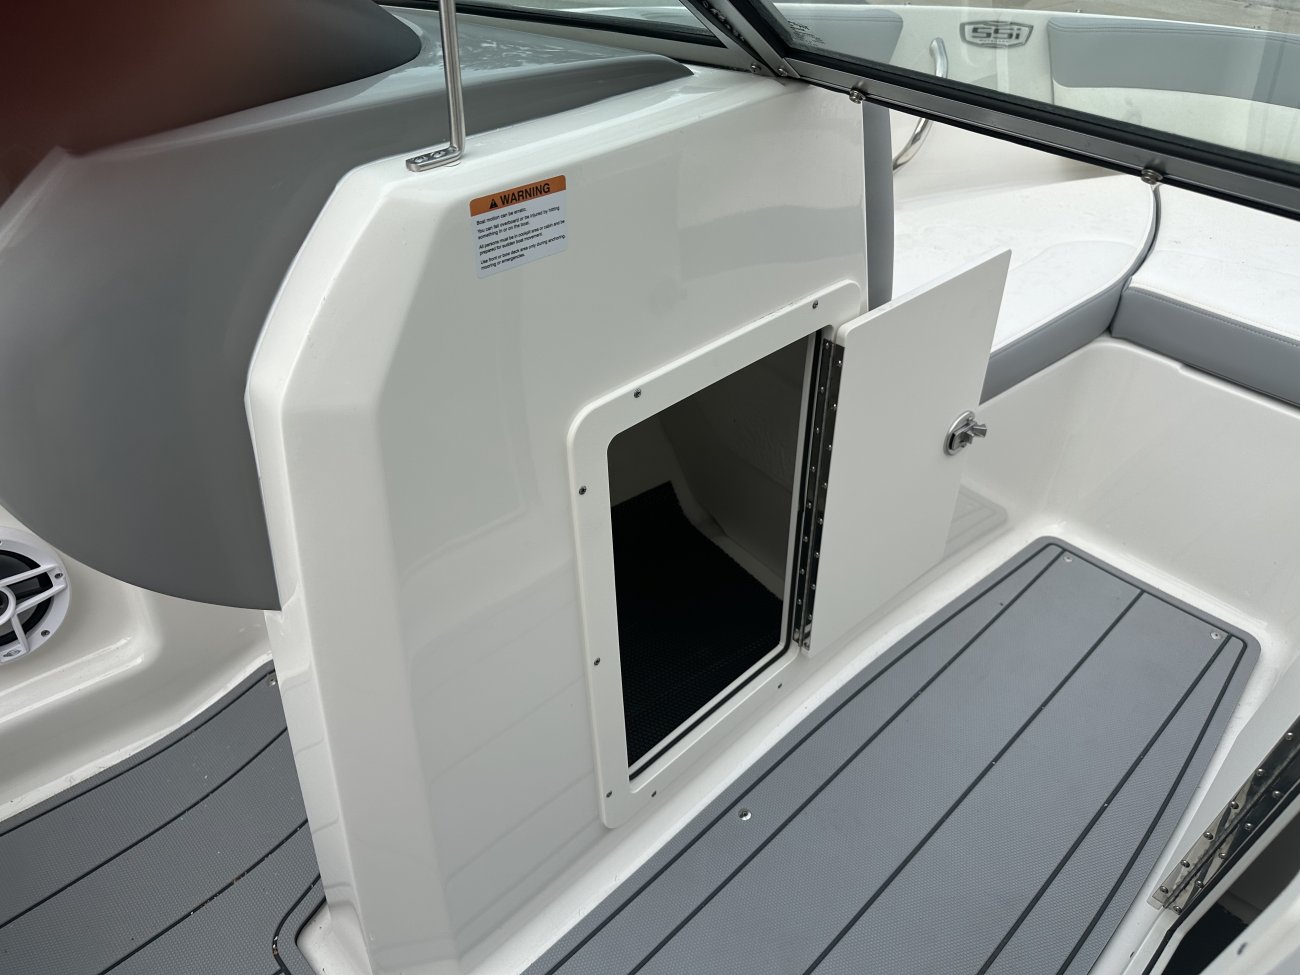 The deckboat is a cross between a bowrider and a pontoon boat.  It features a rather flat deck area with lots of room for people while still offering the speed and agility of a runabout.